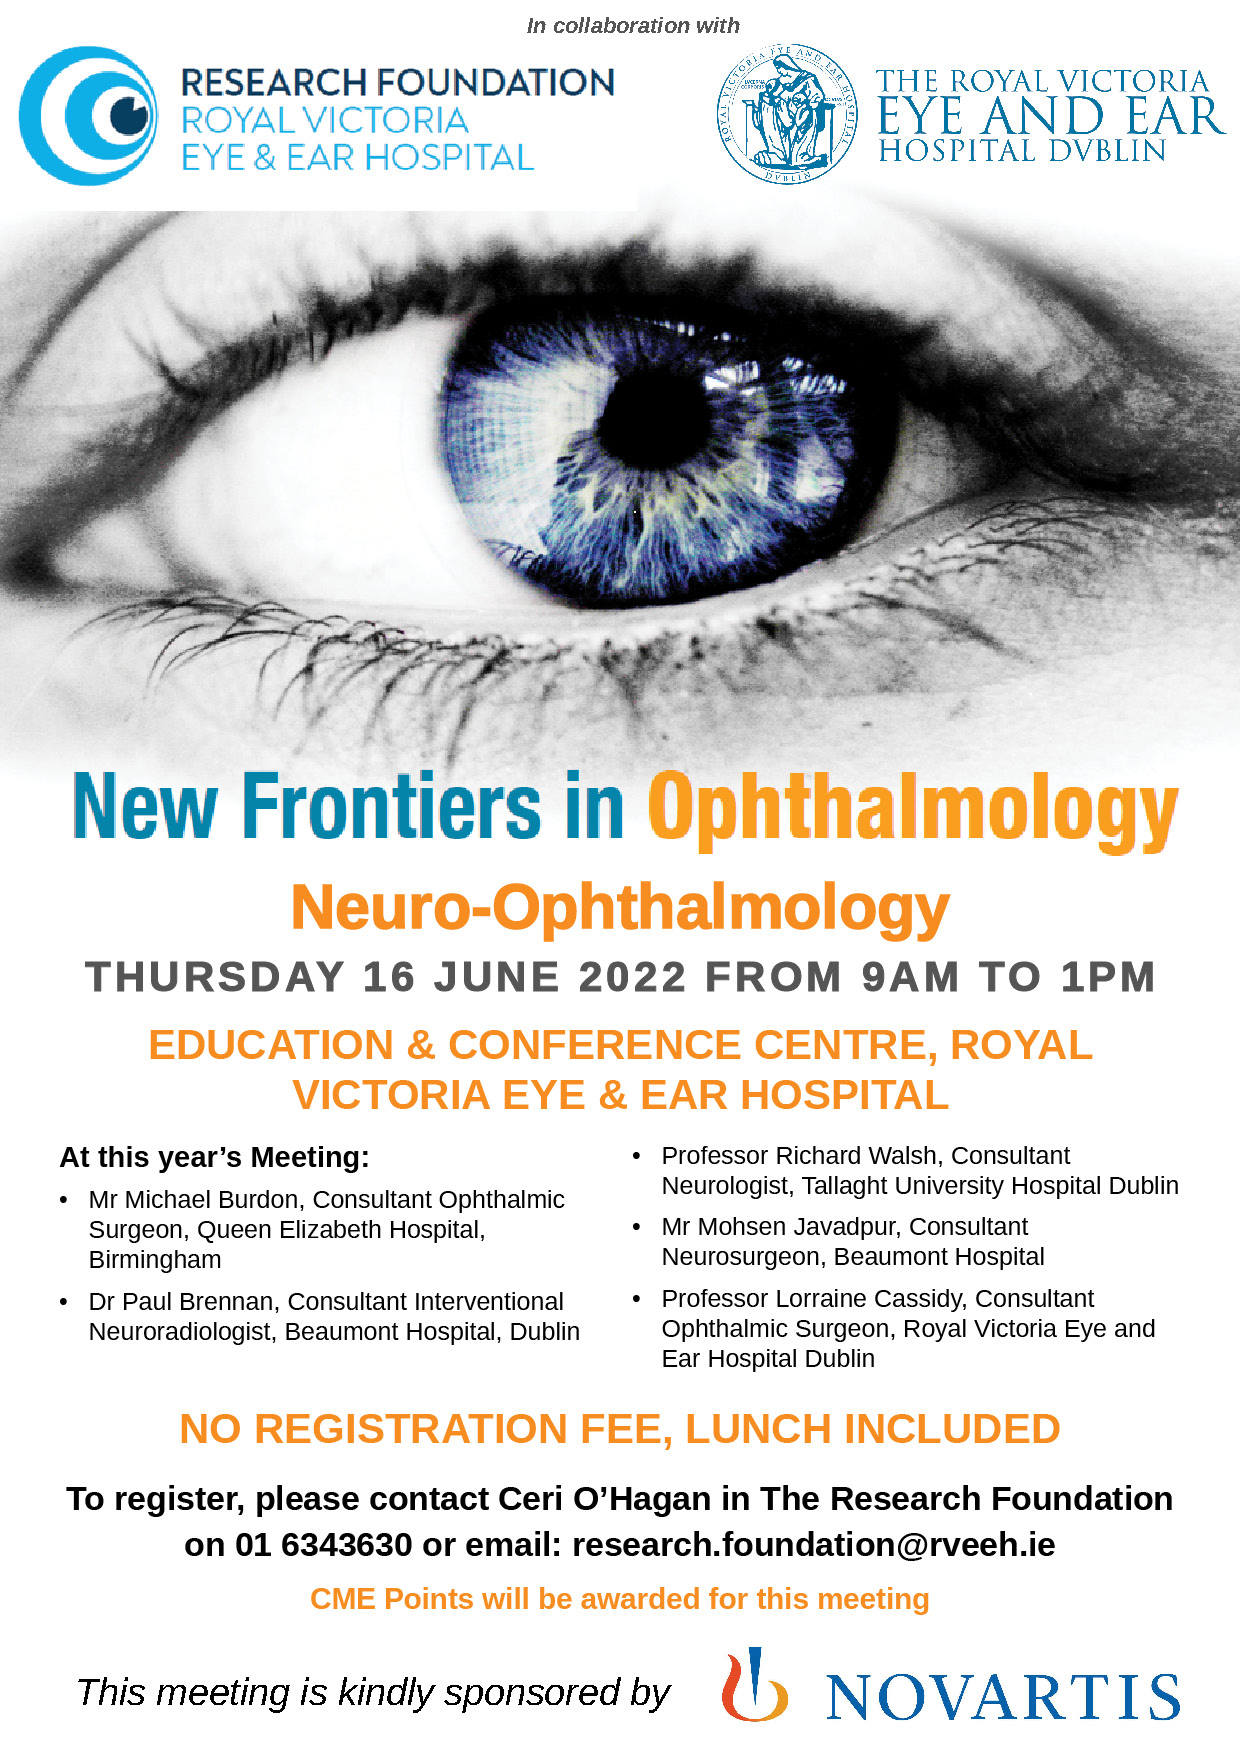 A poster for the New Frontiers in Ophthalmology 2022